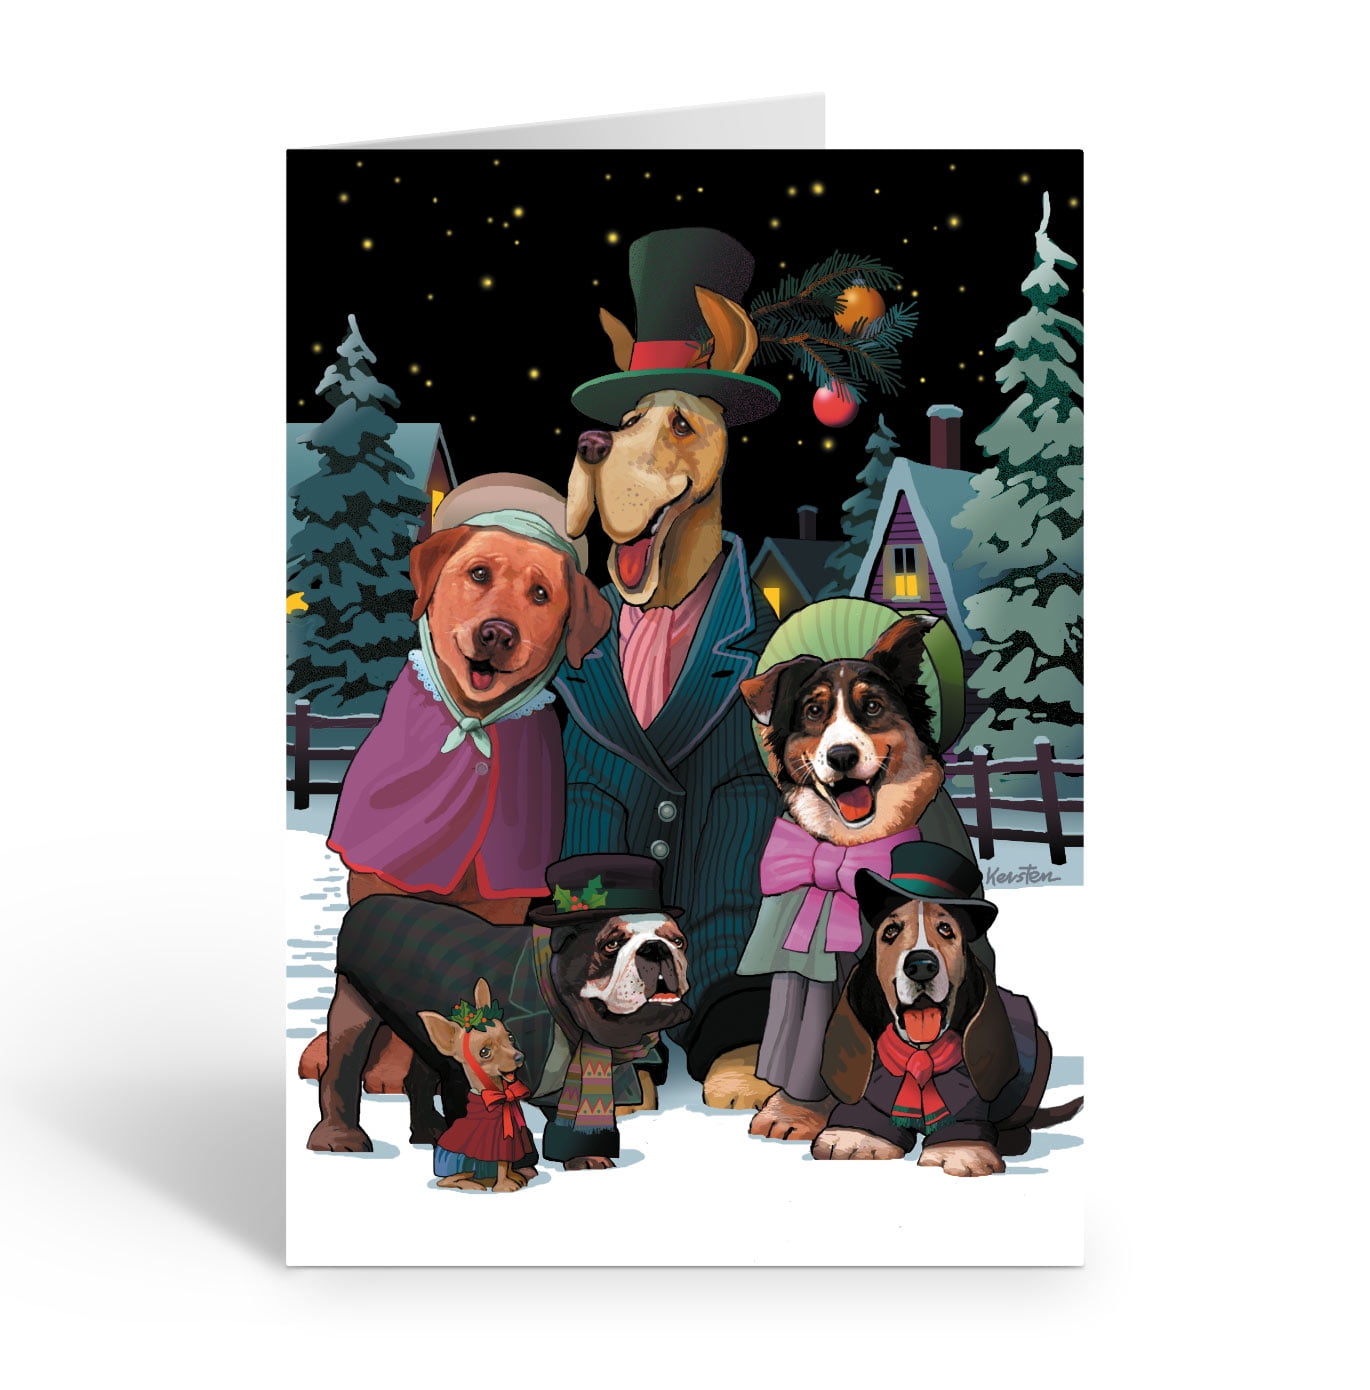 French Bulldog Tan Dog Cartoon in Snow Christmas Holiday Greeting Cards 5 x 7 inches Set of 25 